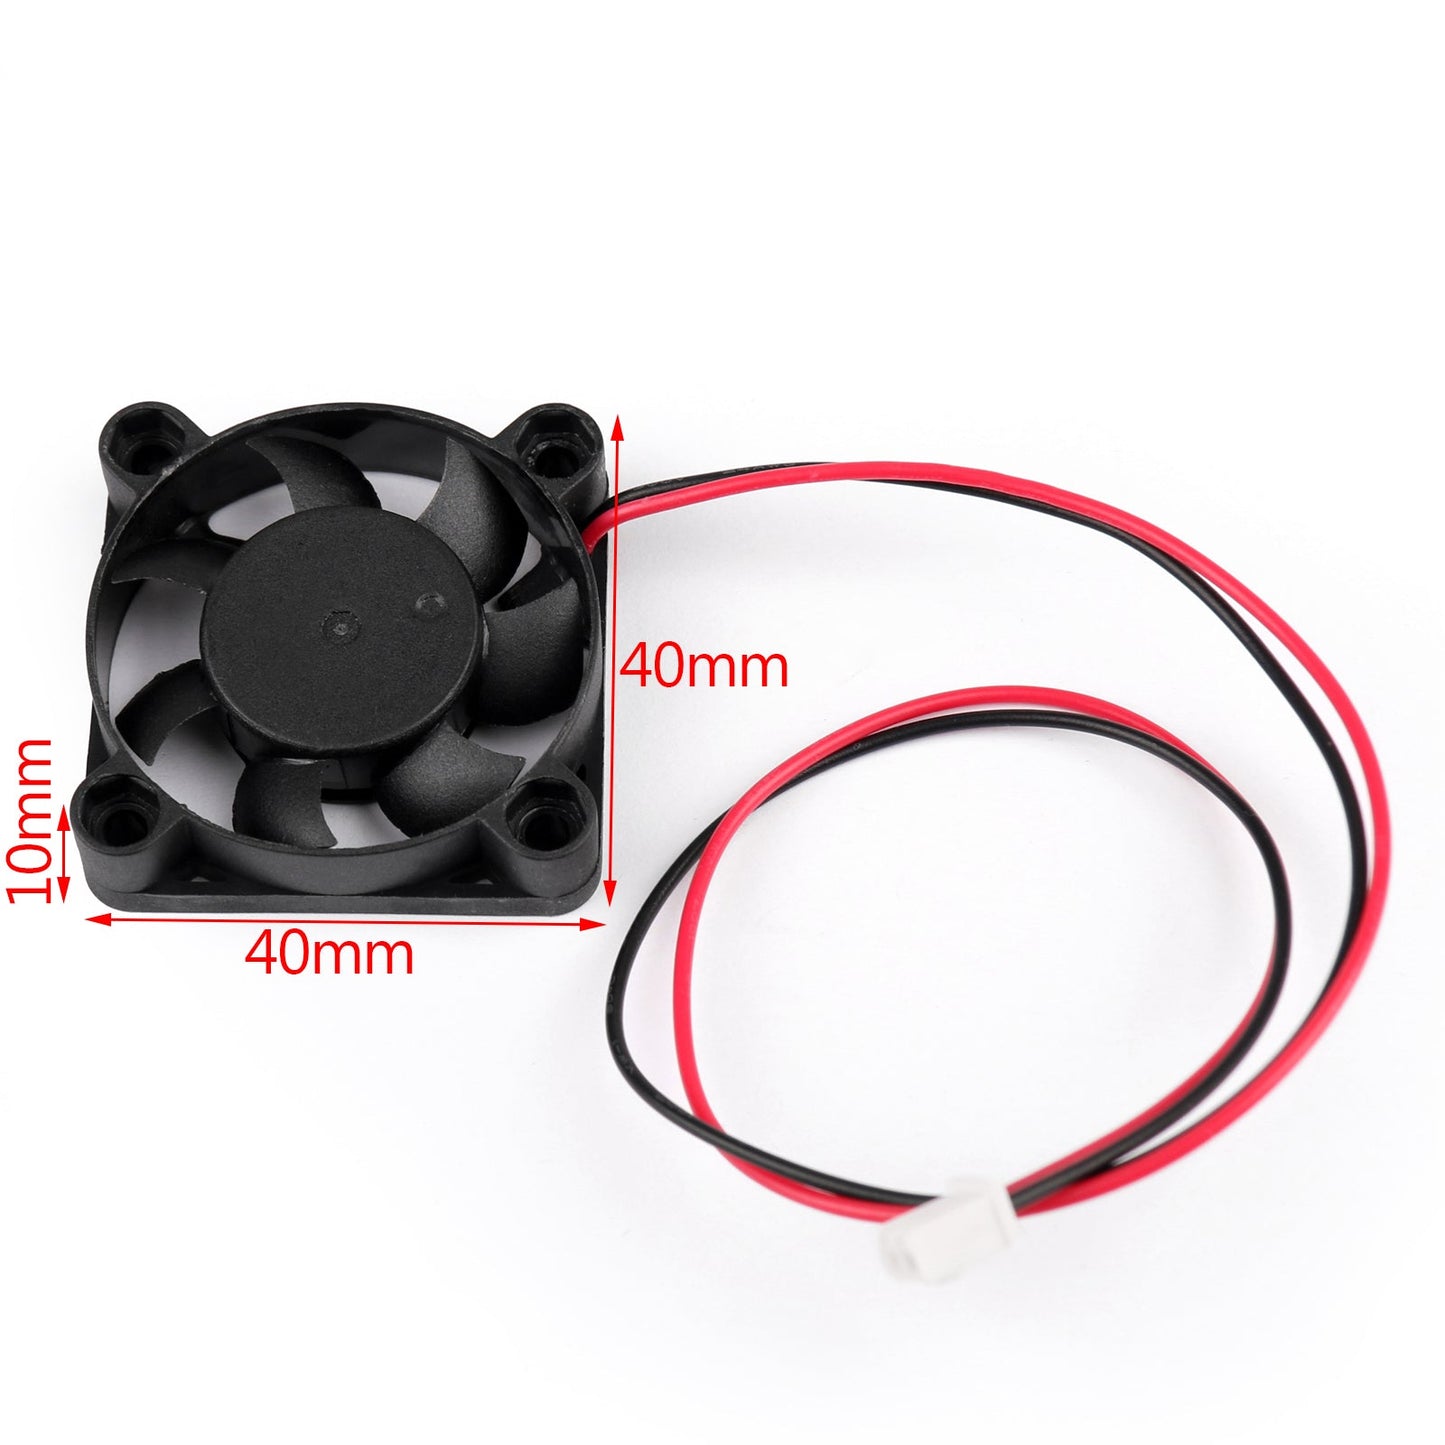 4Pcs DC Brushless Cooling PC Computer Fan 24V 4010s 40x40x10mm 0.15A 2 Pin Wire